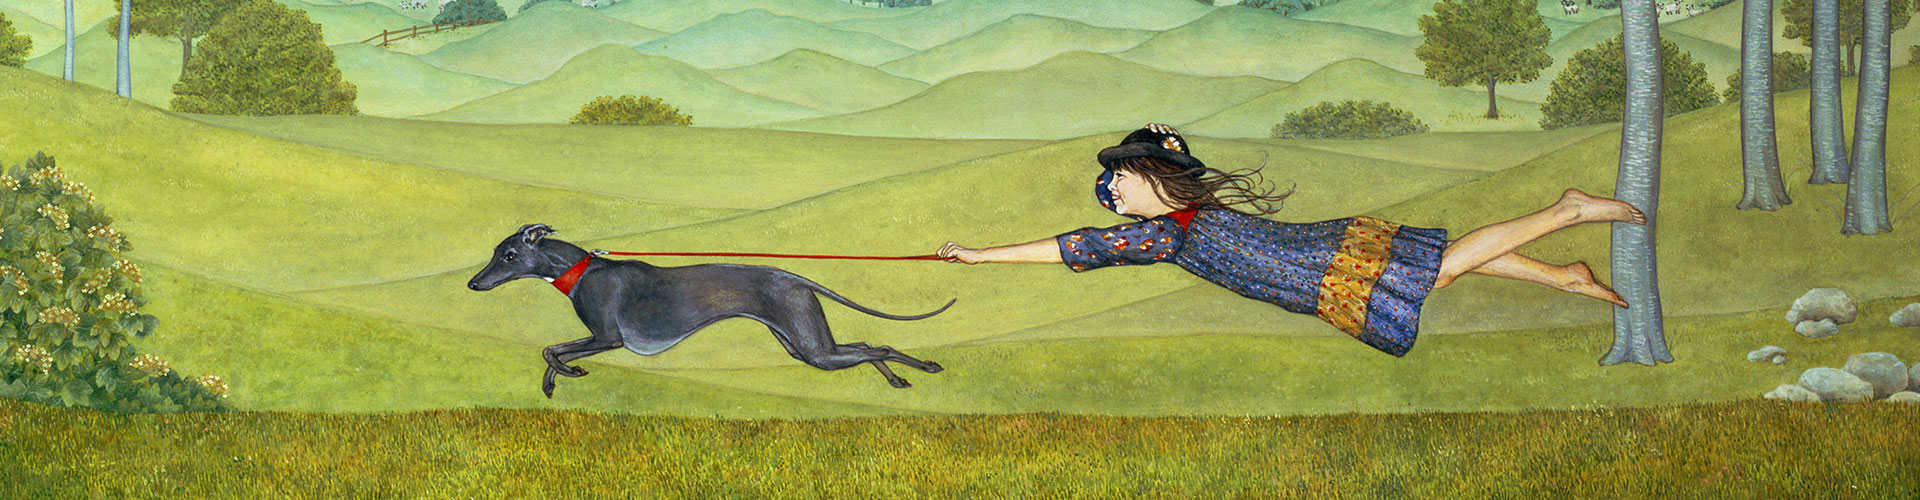 Walking the Dog, Greeting Card by Ditz   - Featured on Desktop Devices